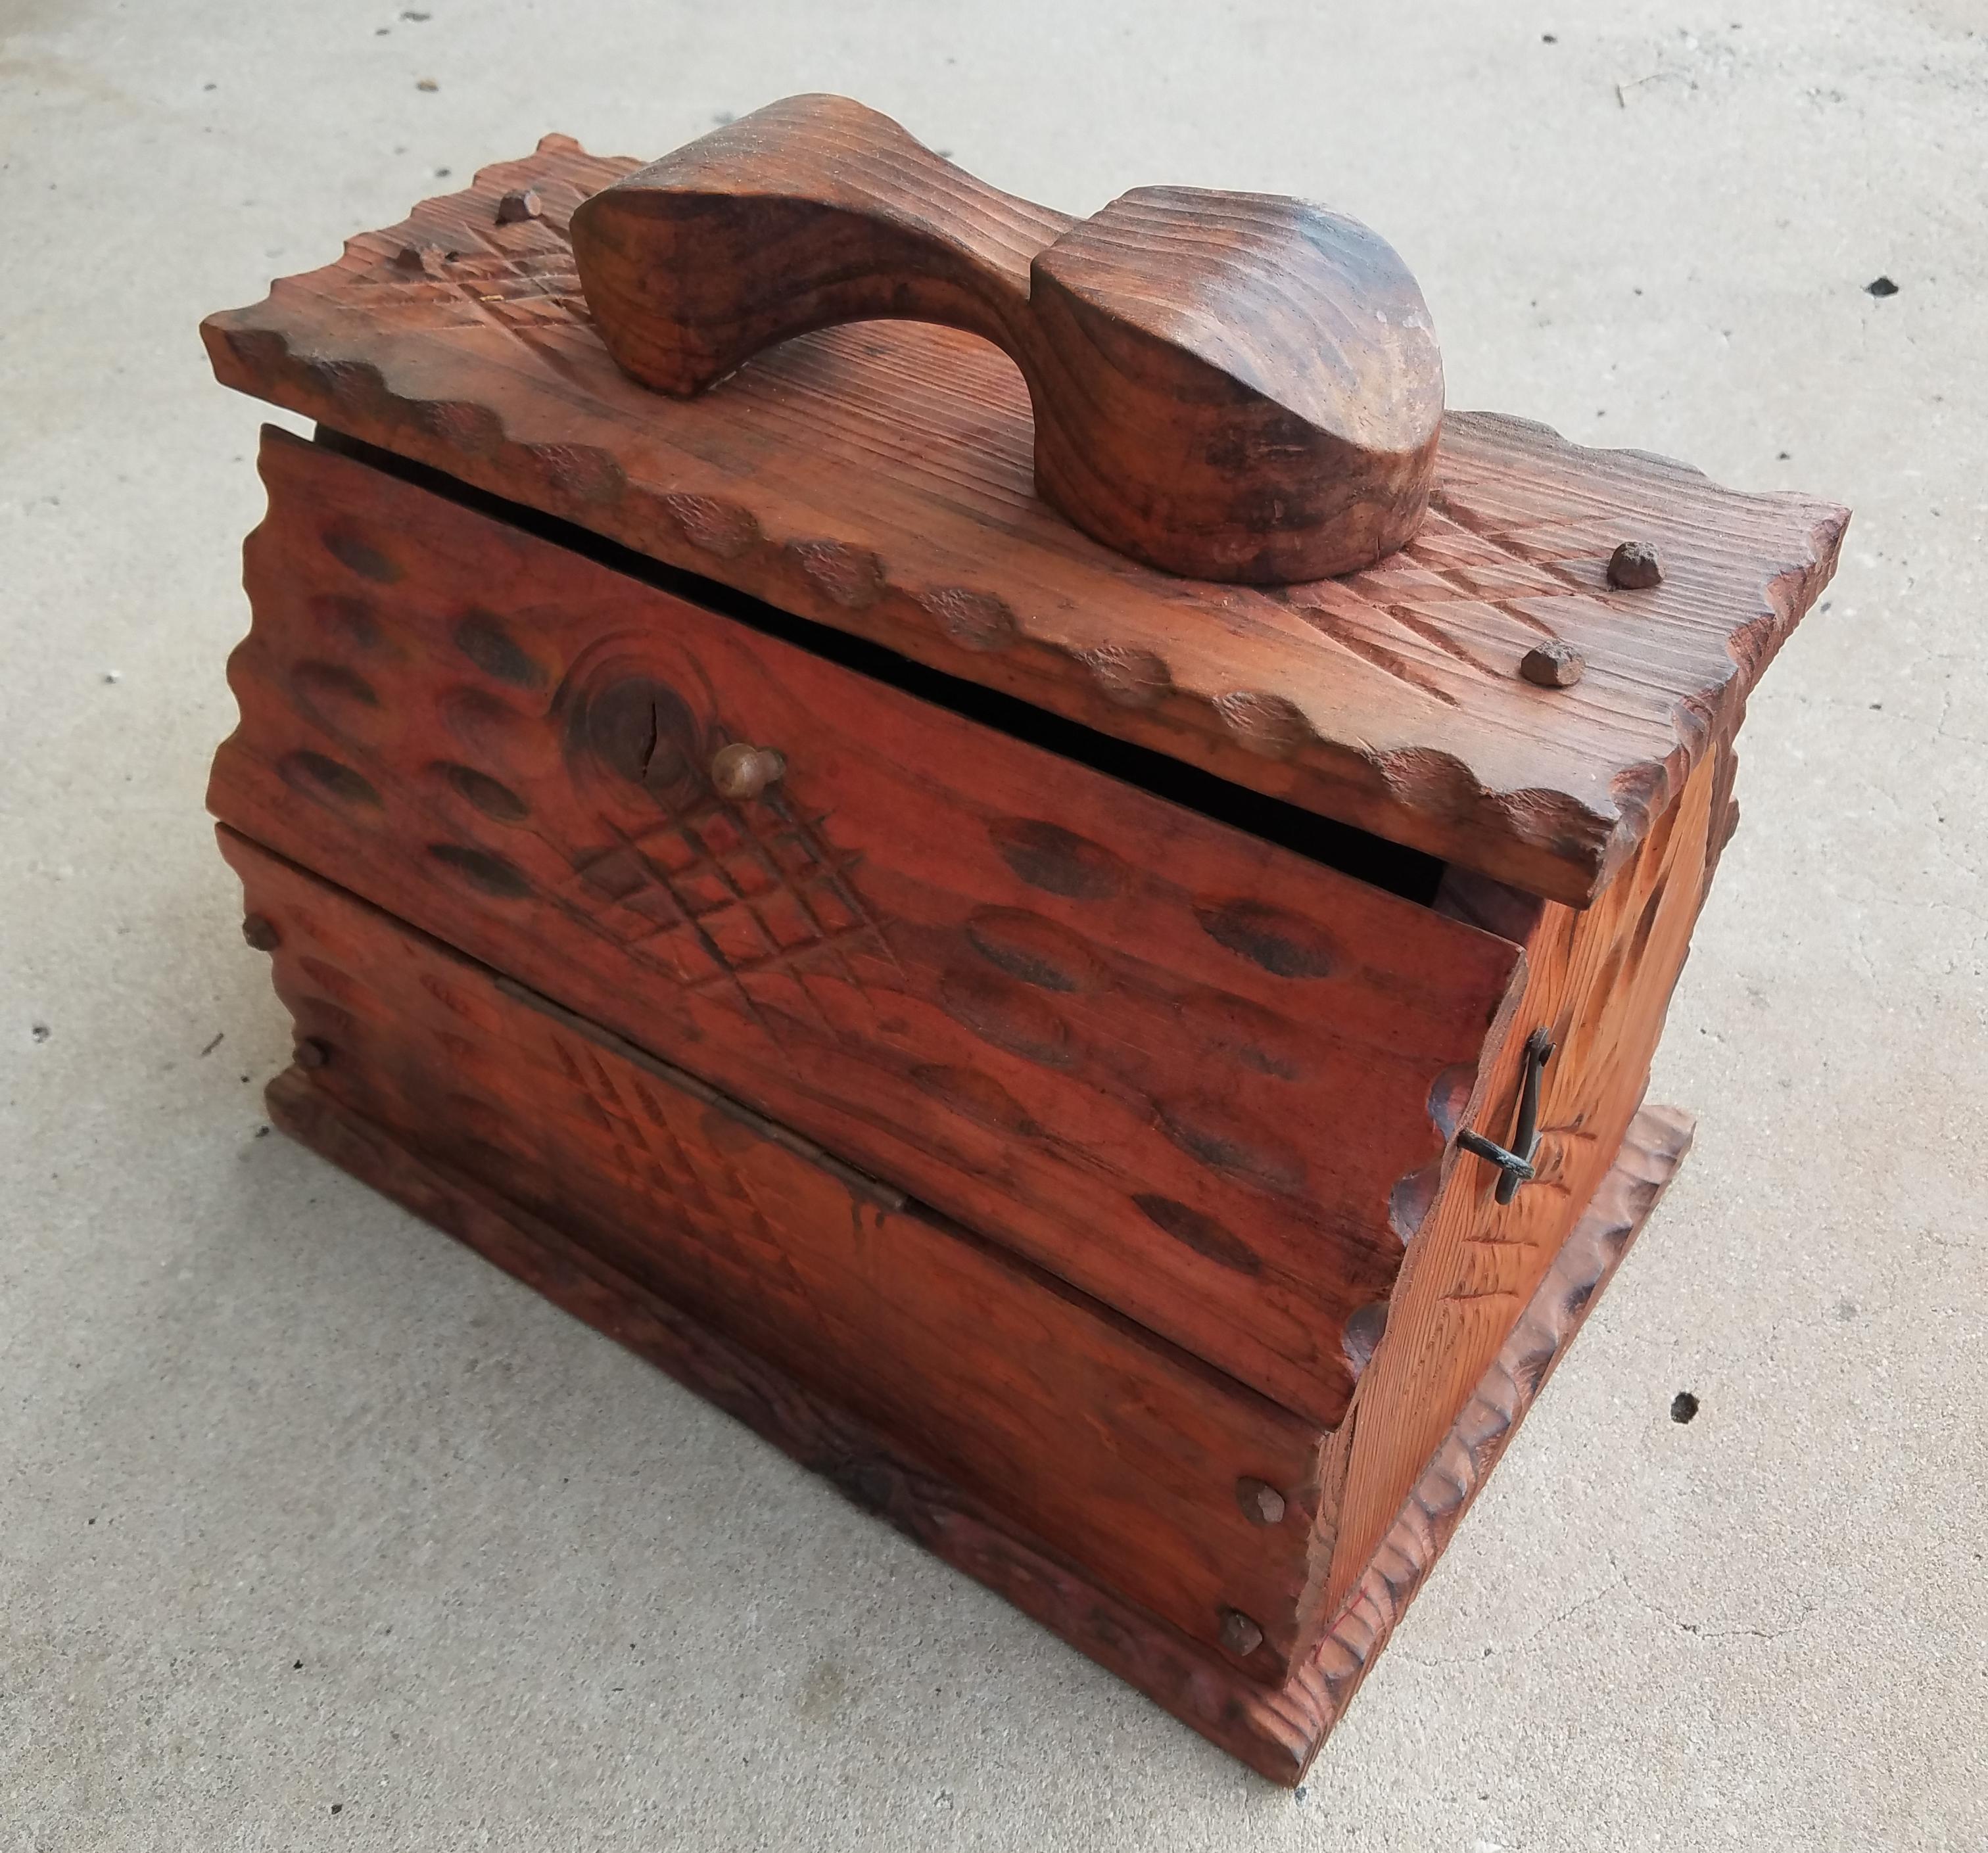 Orange Stained Vintage Moroccan Shoe Shine Box In Excellent Condition For Sale In Orlando, FL